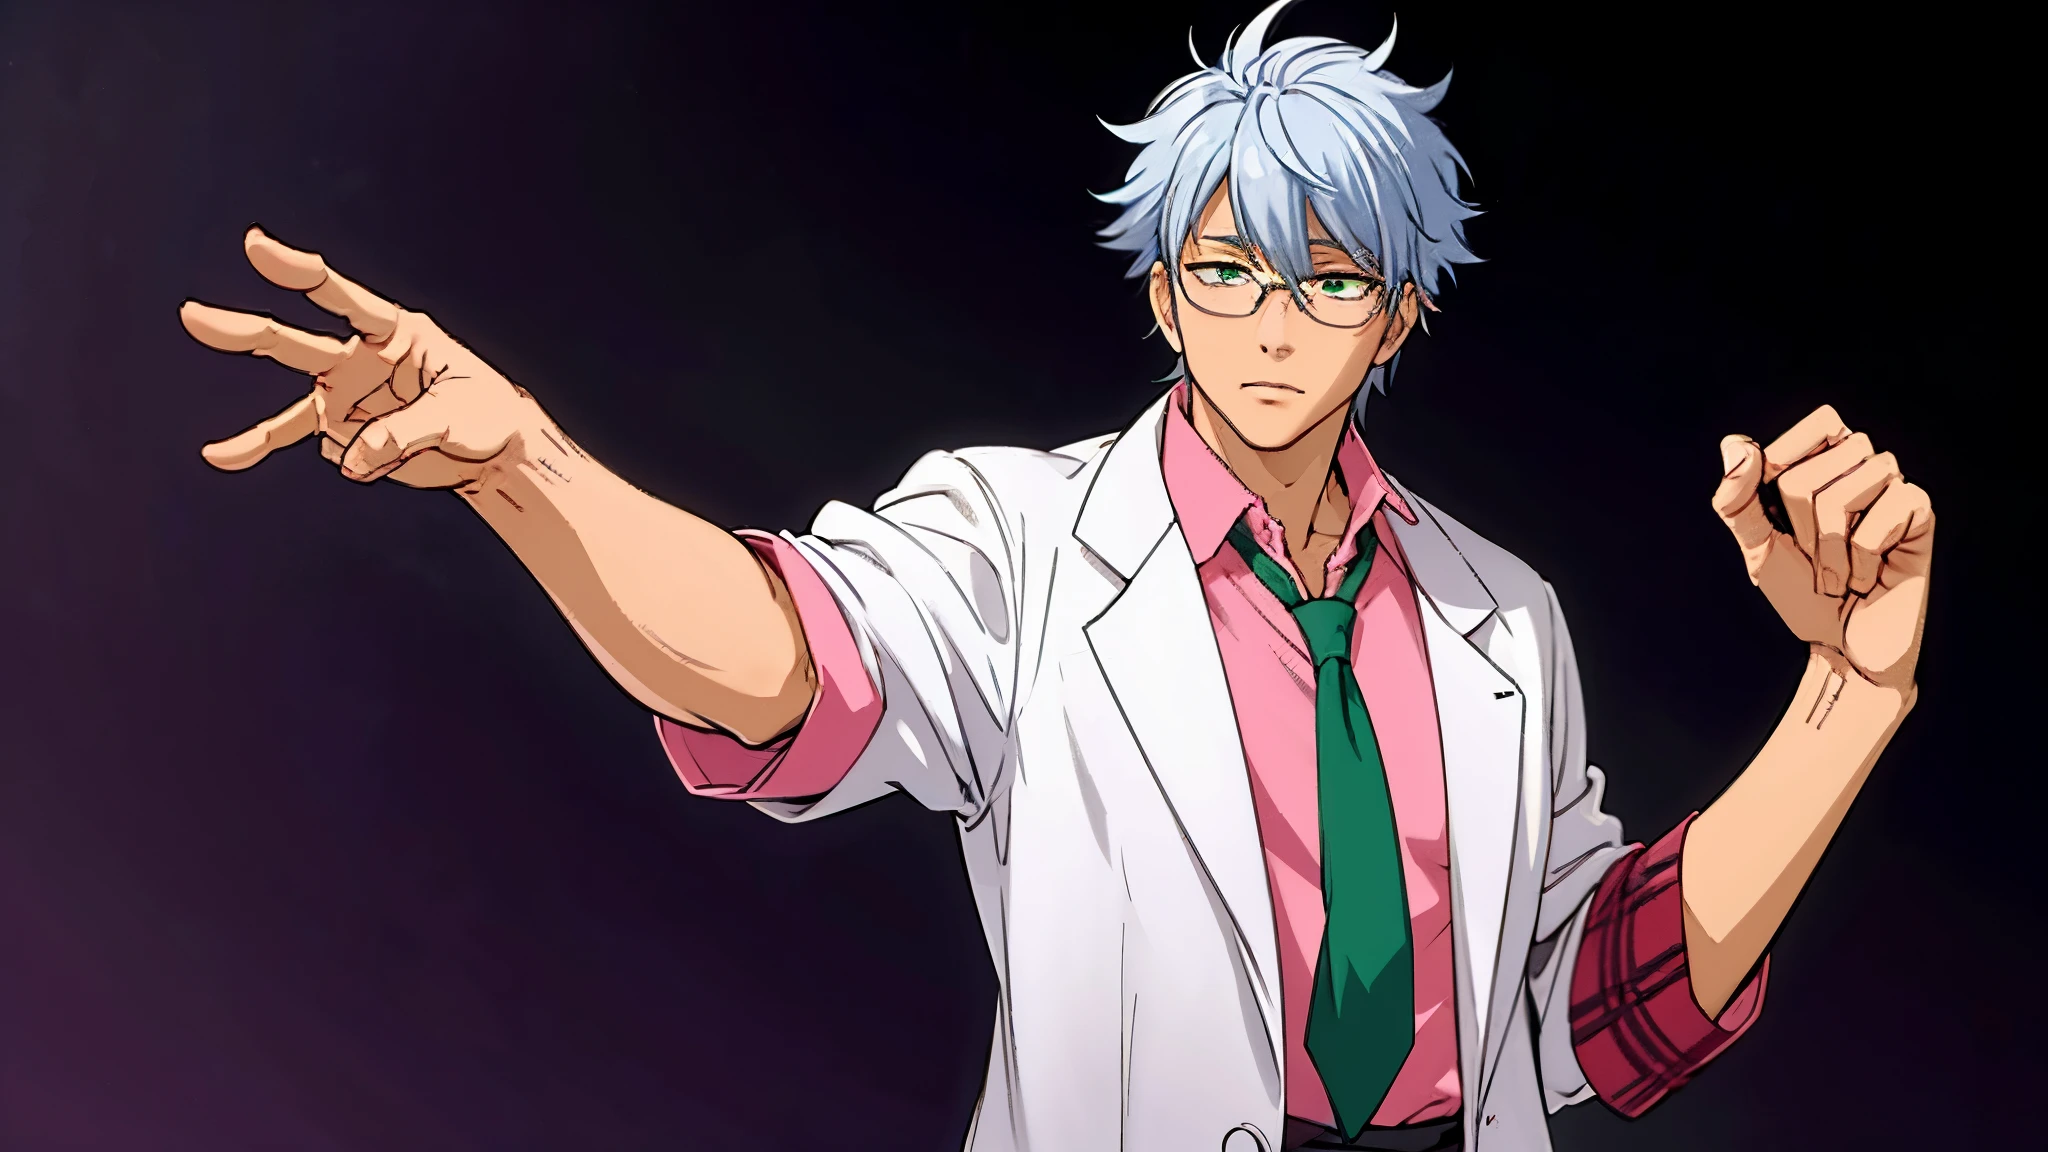 a teacher with a gray hair, he is wearing medical glasses, a lab coat, a green tie and a pink shirt